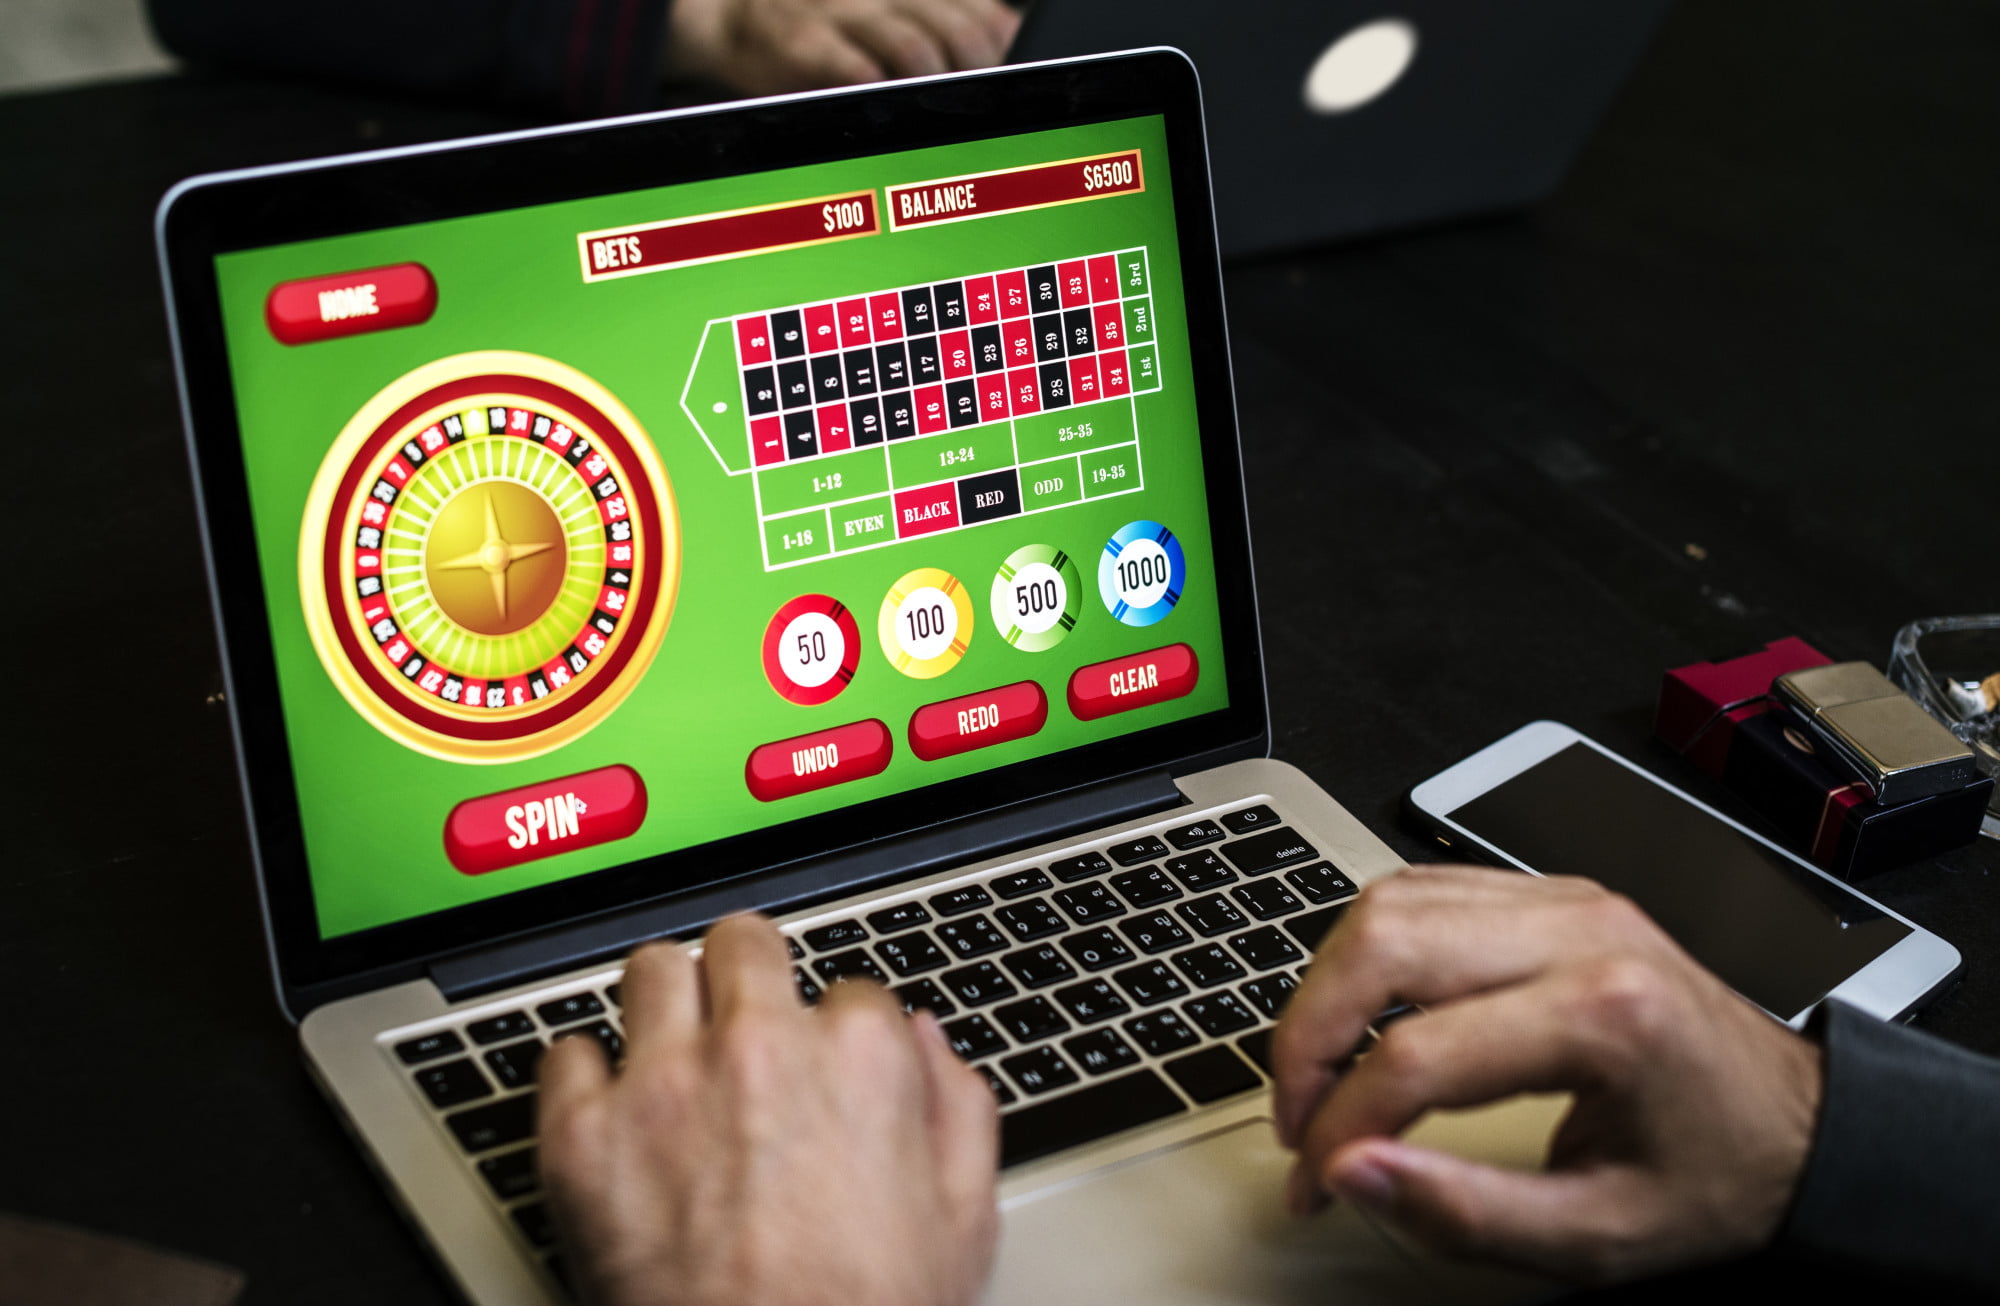 Gambling can be a whole lot of fun, especially when you're winning. These five online gambling tips will help improve your odds.